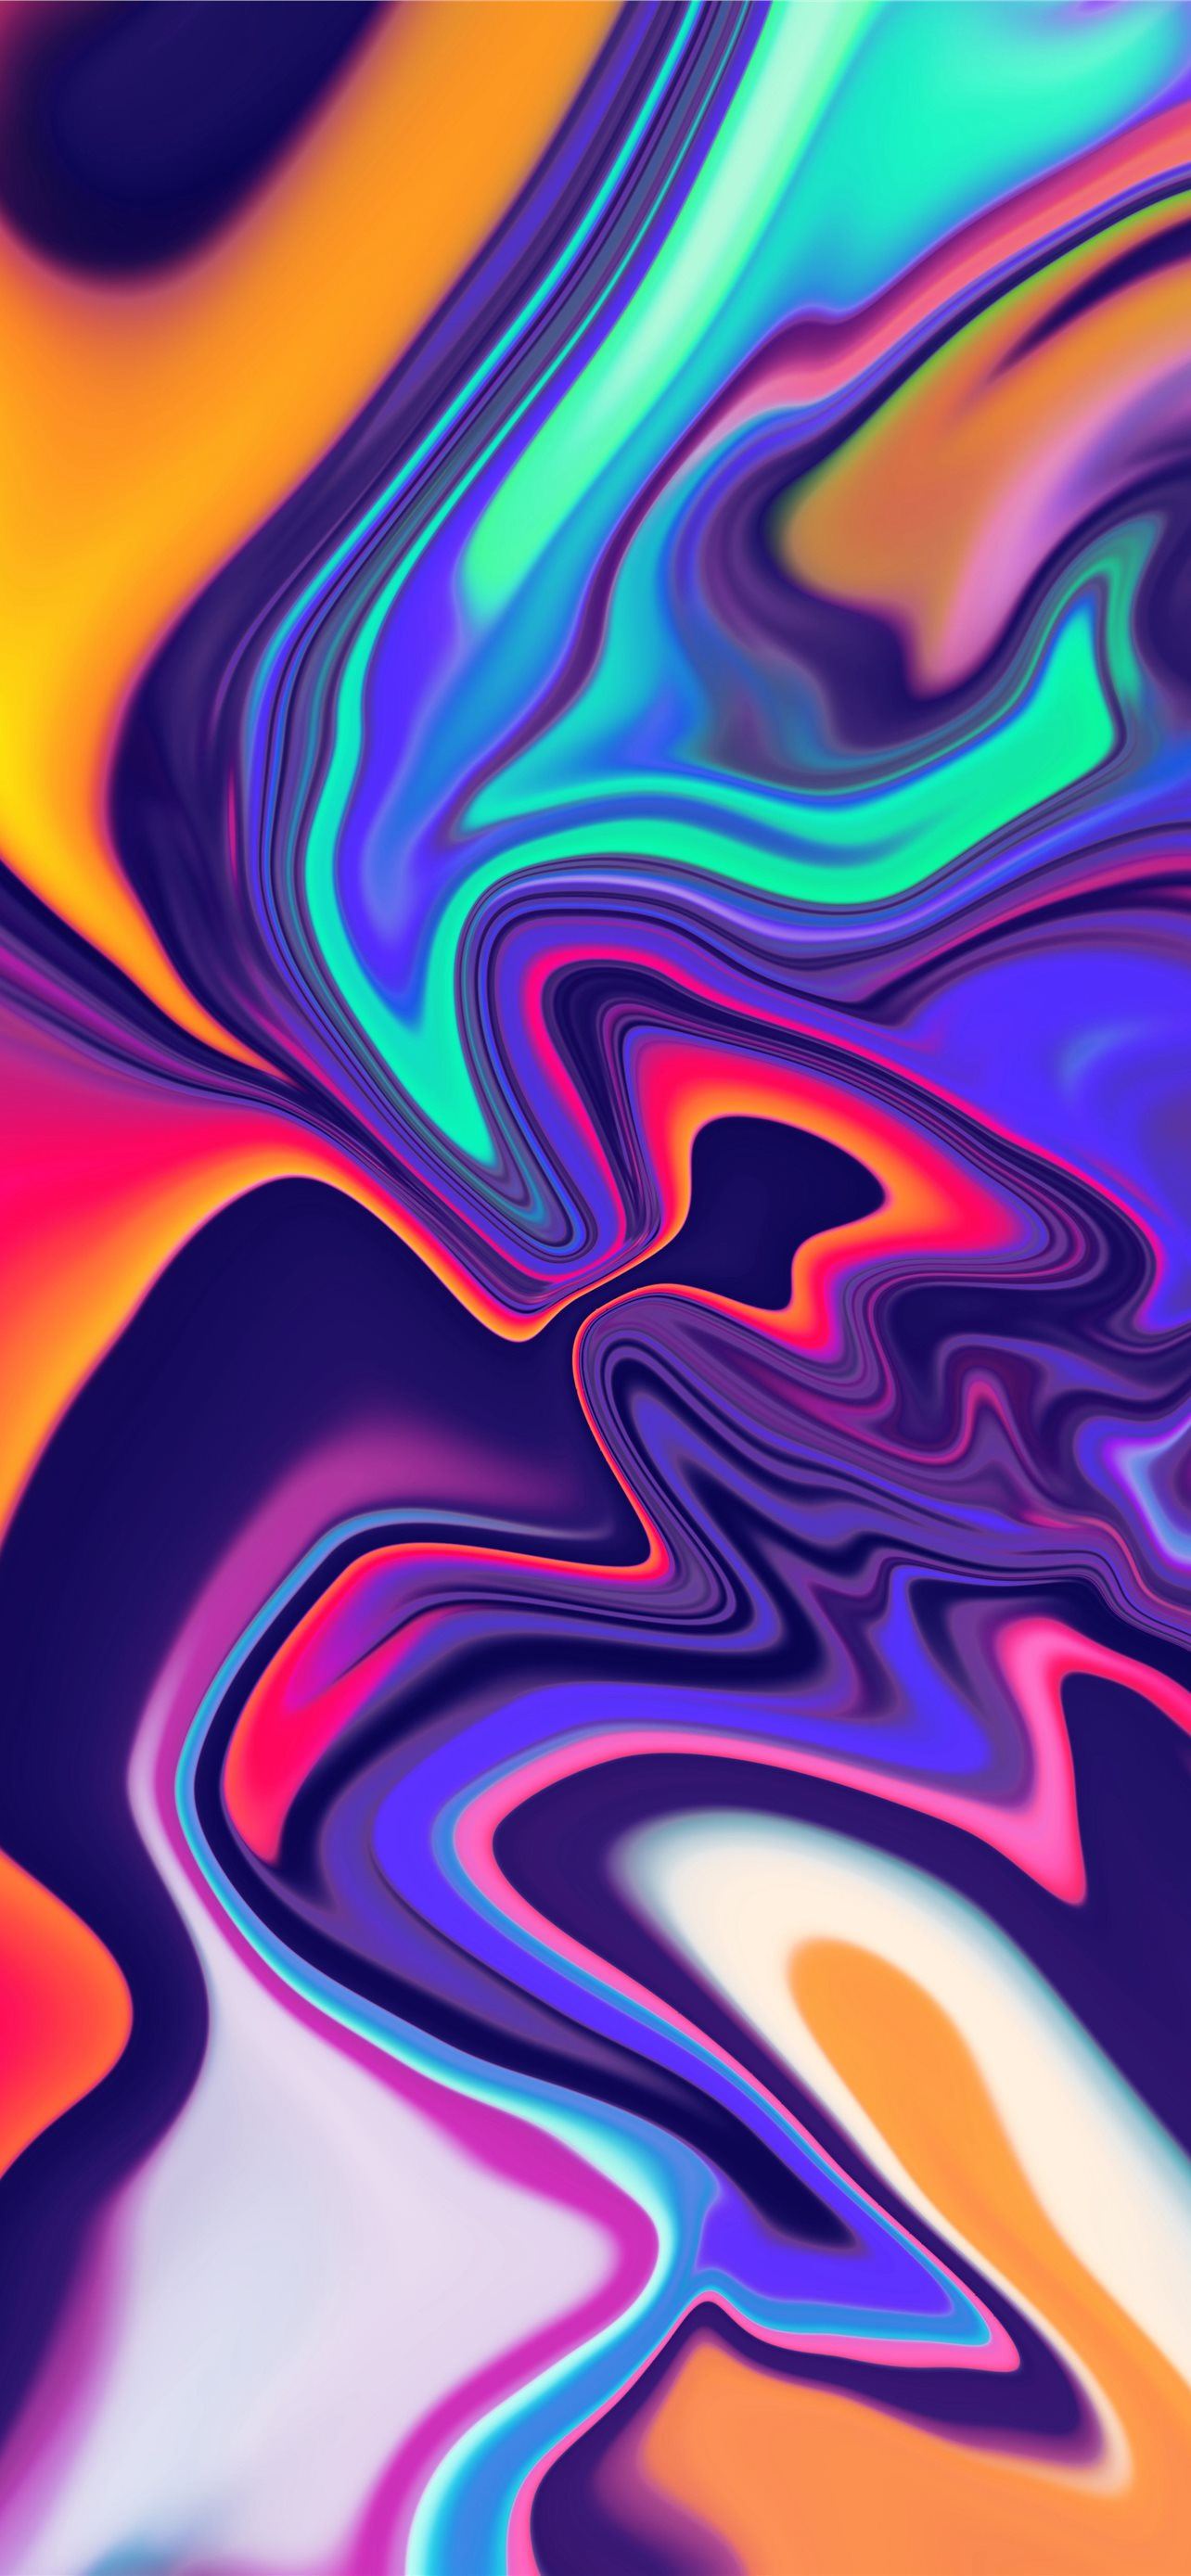 Trippy Iphone Wallpapers